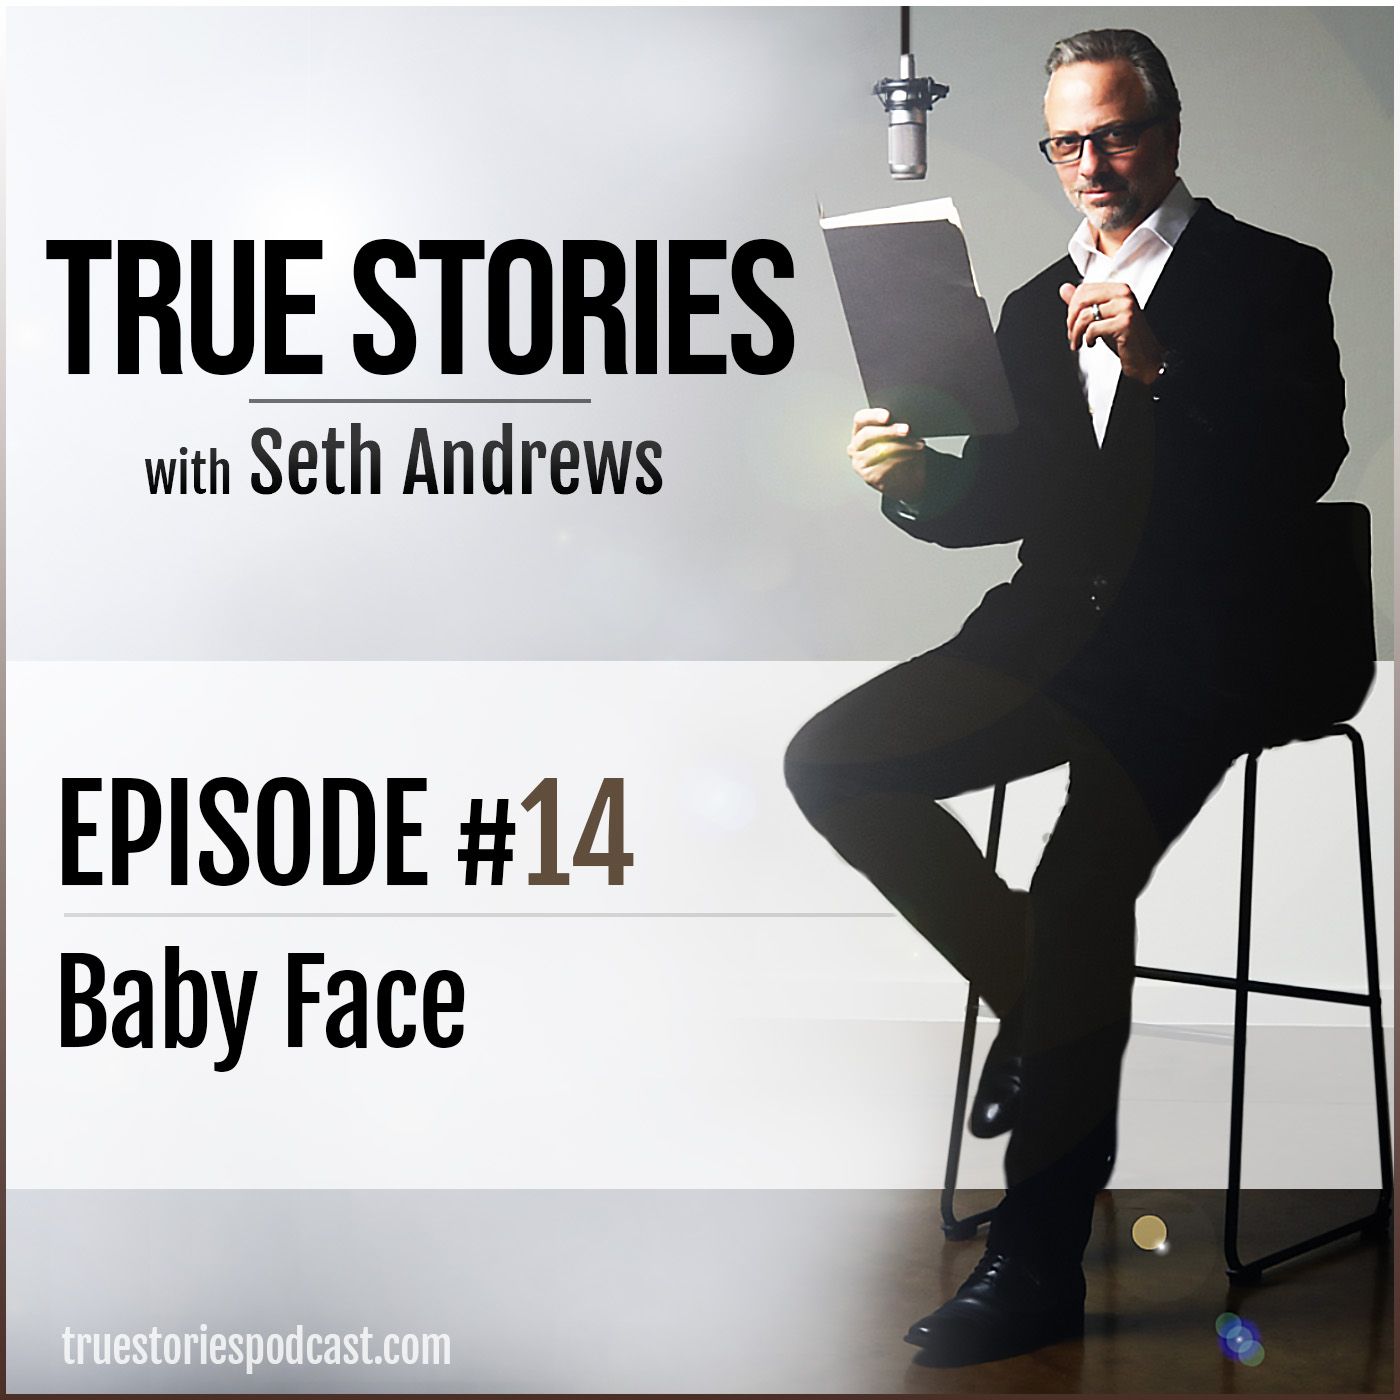 True Stories #14 - Baby Face